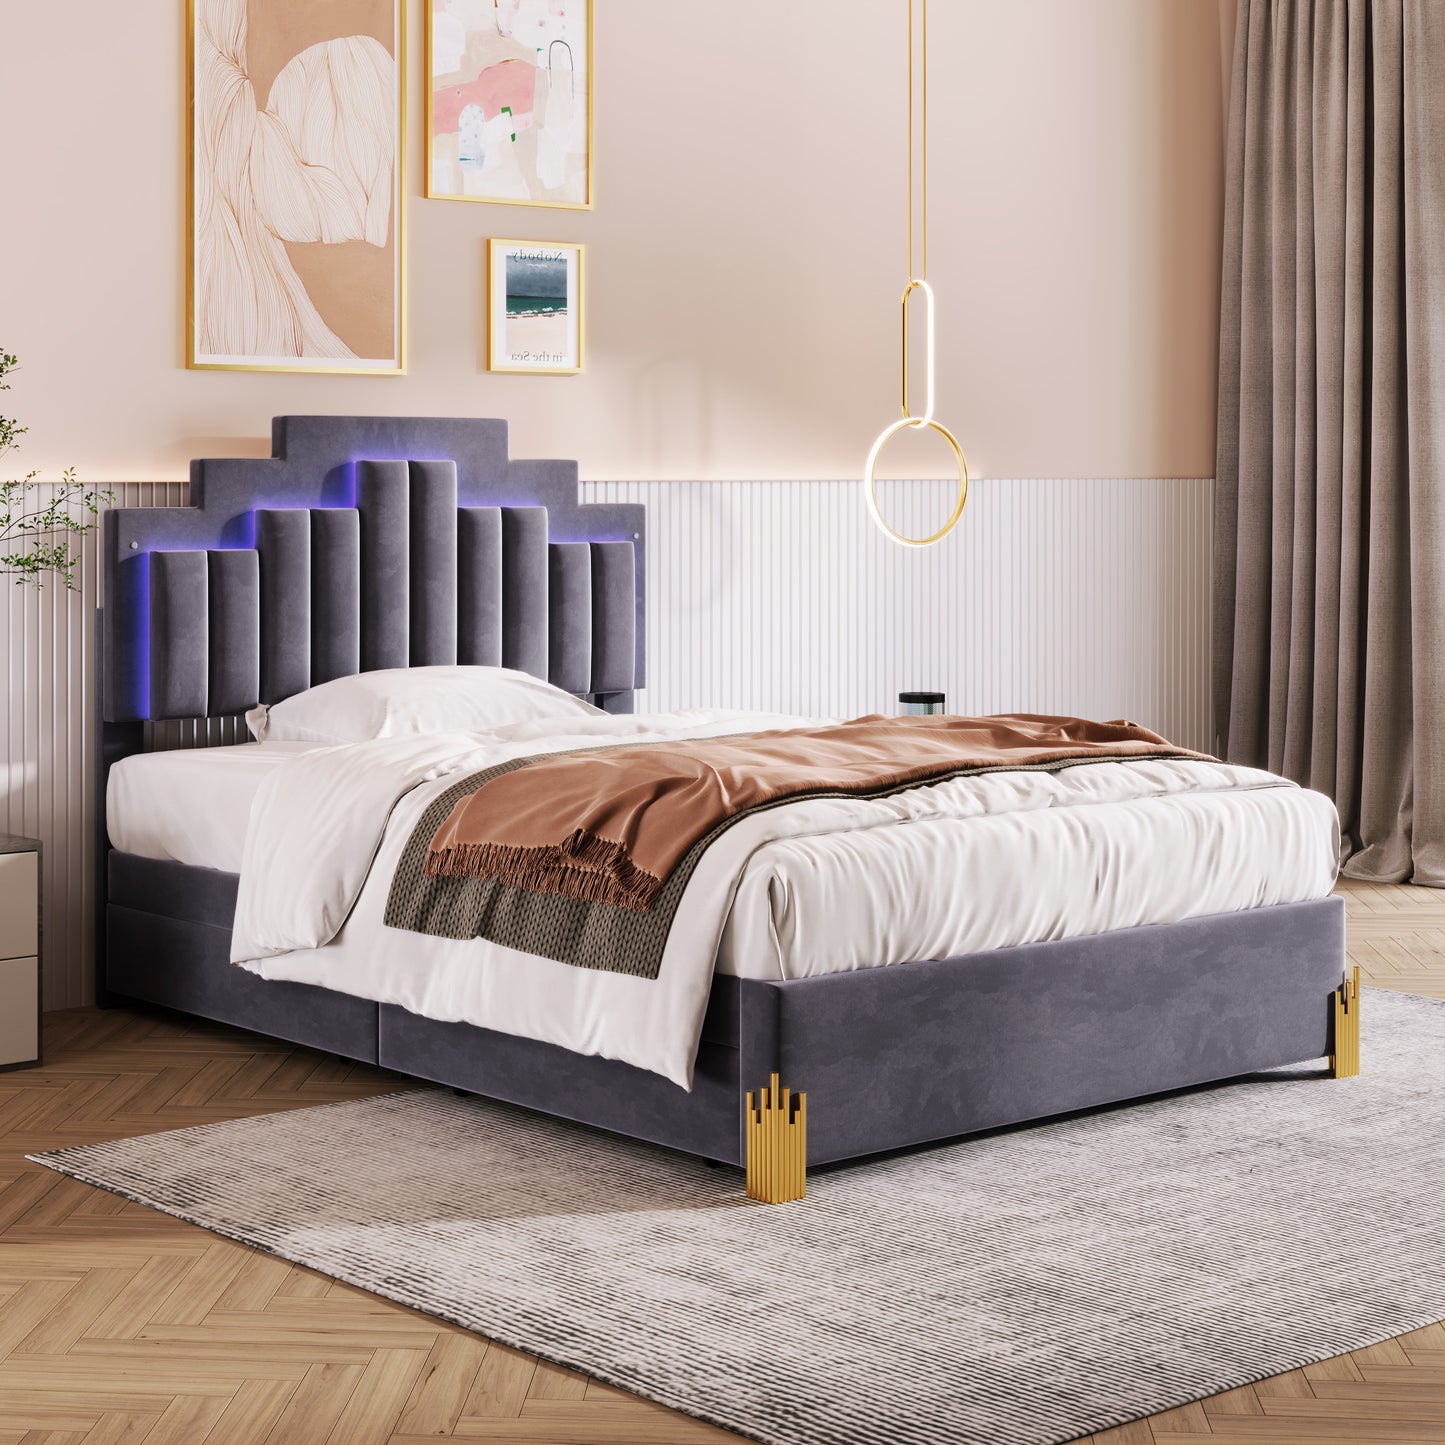 Full Size Upholstered Platform Bed with LED Lights and 4 Drawers, Stylish Irregular Metal Bed Legs Design, Gray